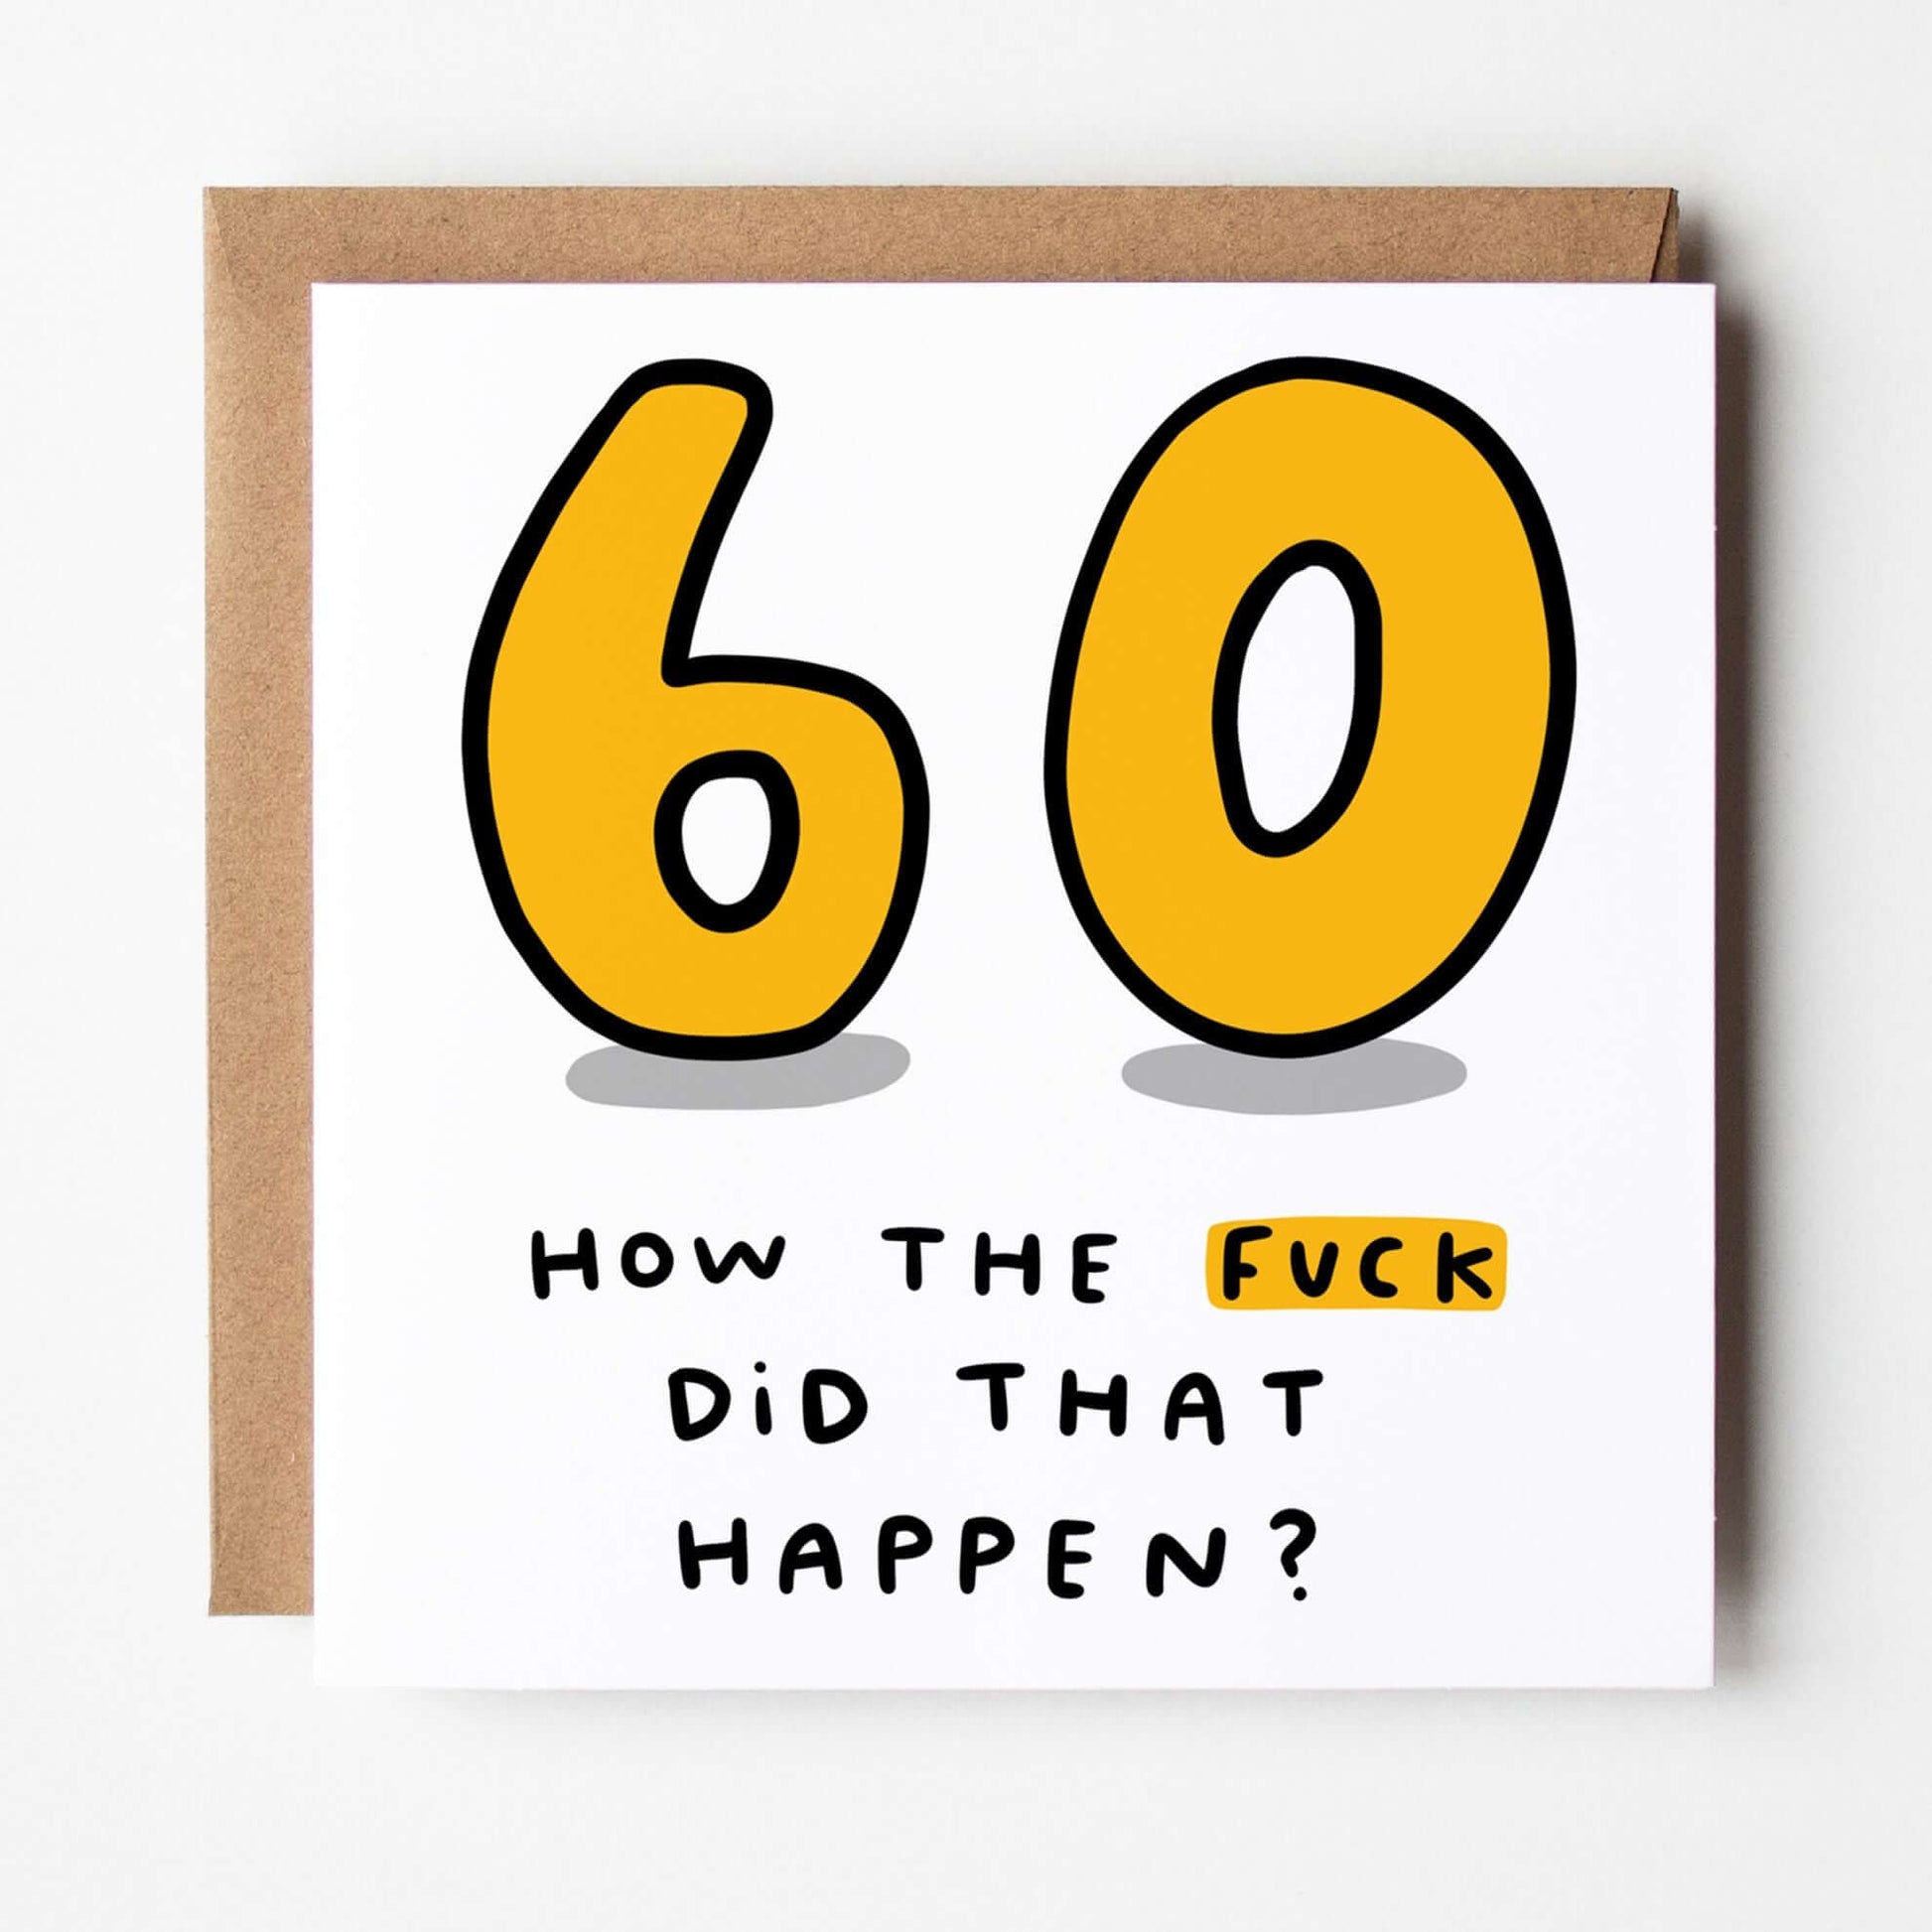 Dandy Sloth 60 How The Fuck Did That Happen 60th Birthday Square Greeting Card Birthday Cards Dandy Sloth